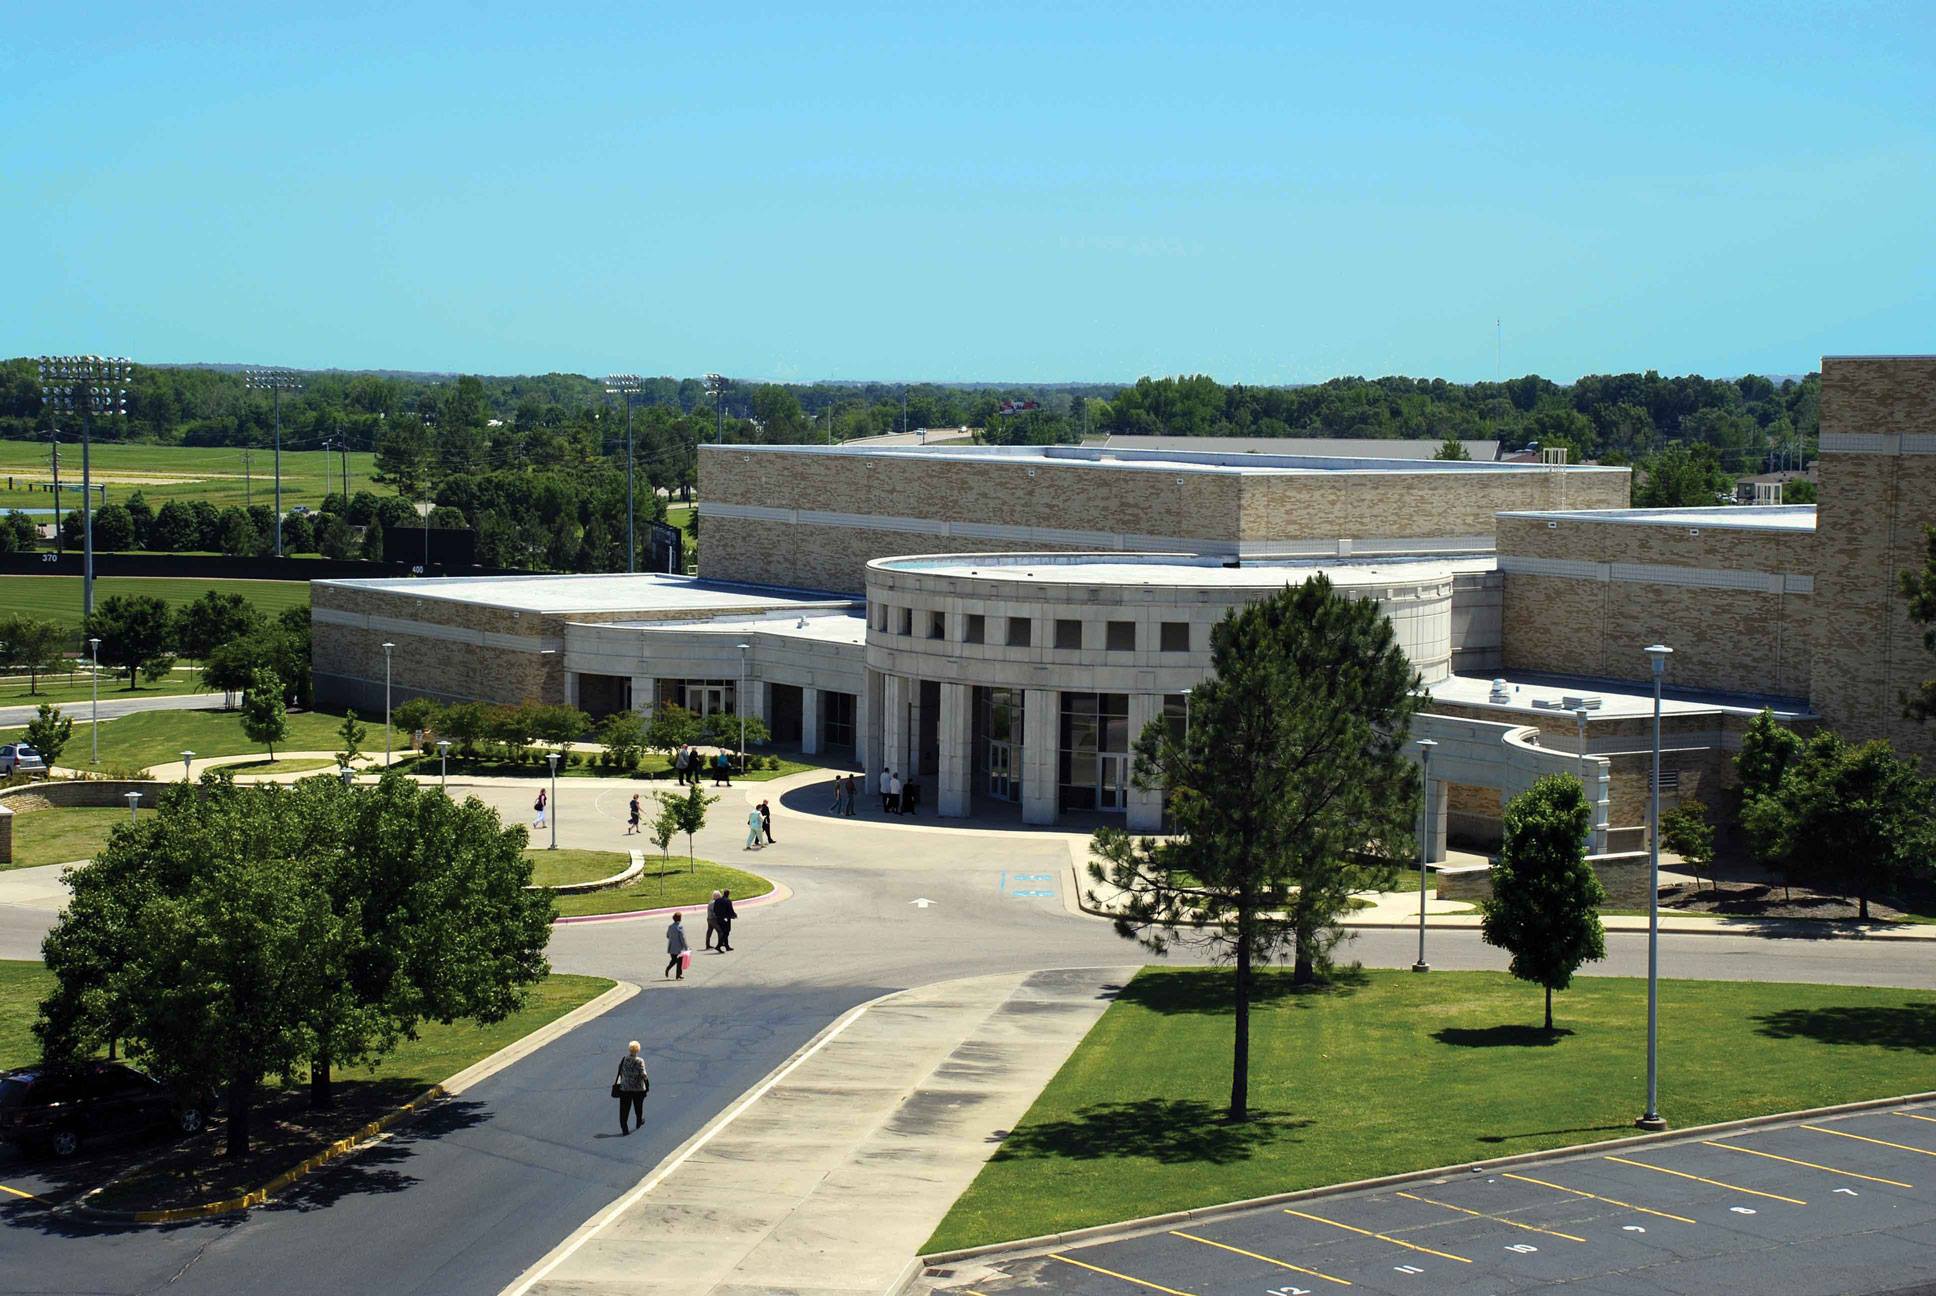 An aerial view of the Fowler Center, looking at the front rotunda entrance.